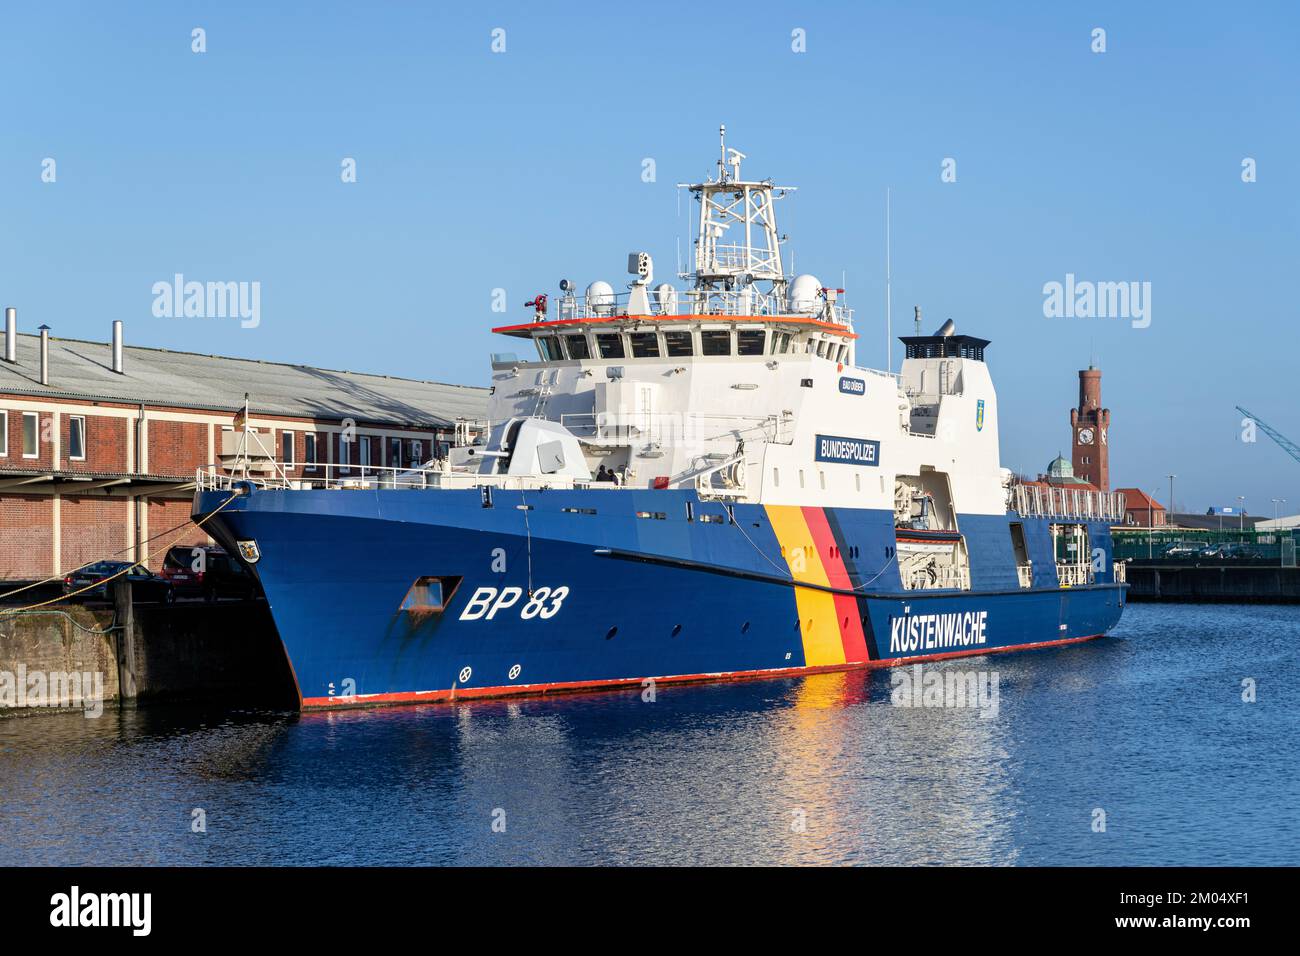 German Federal Police boat BP 83 BAD DÜBEN in the port of Cuxhaven, Germany Stock Photo